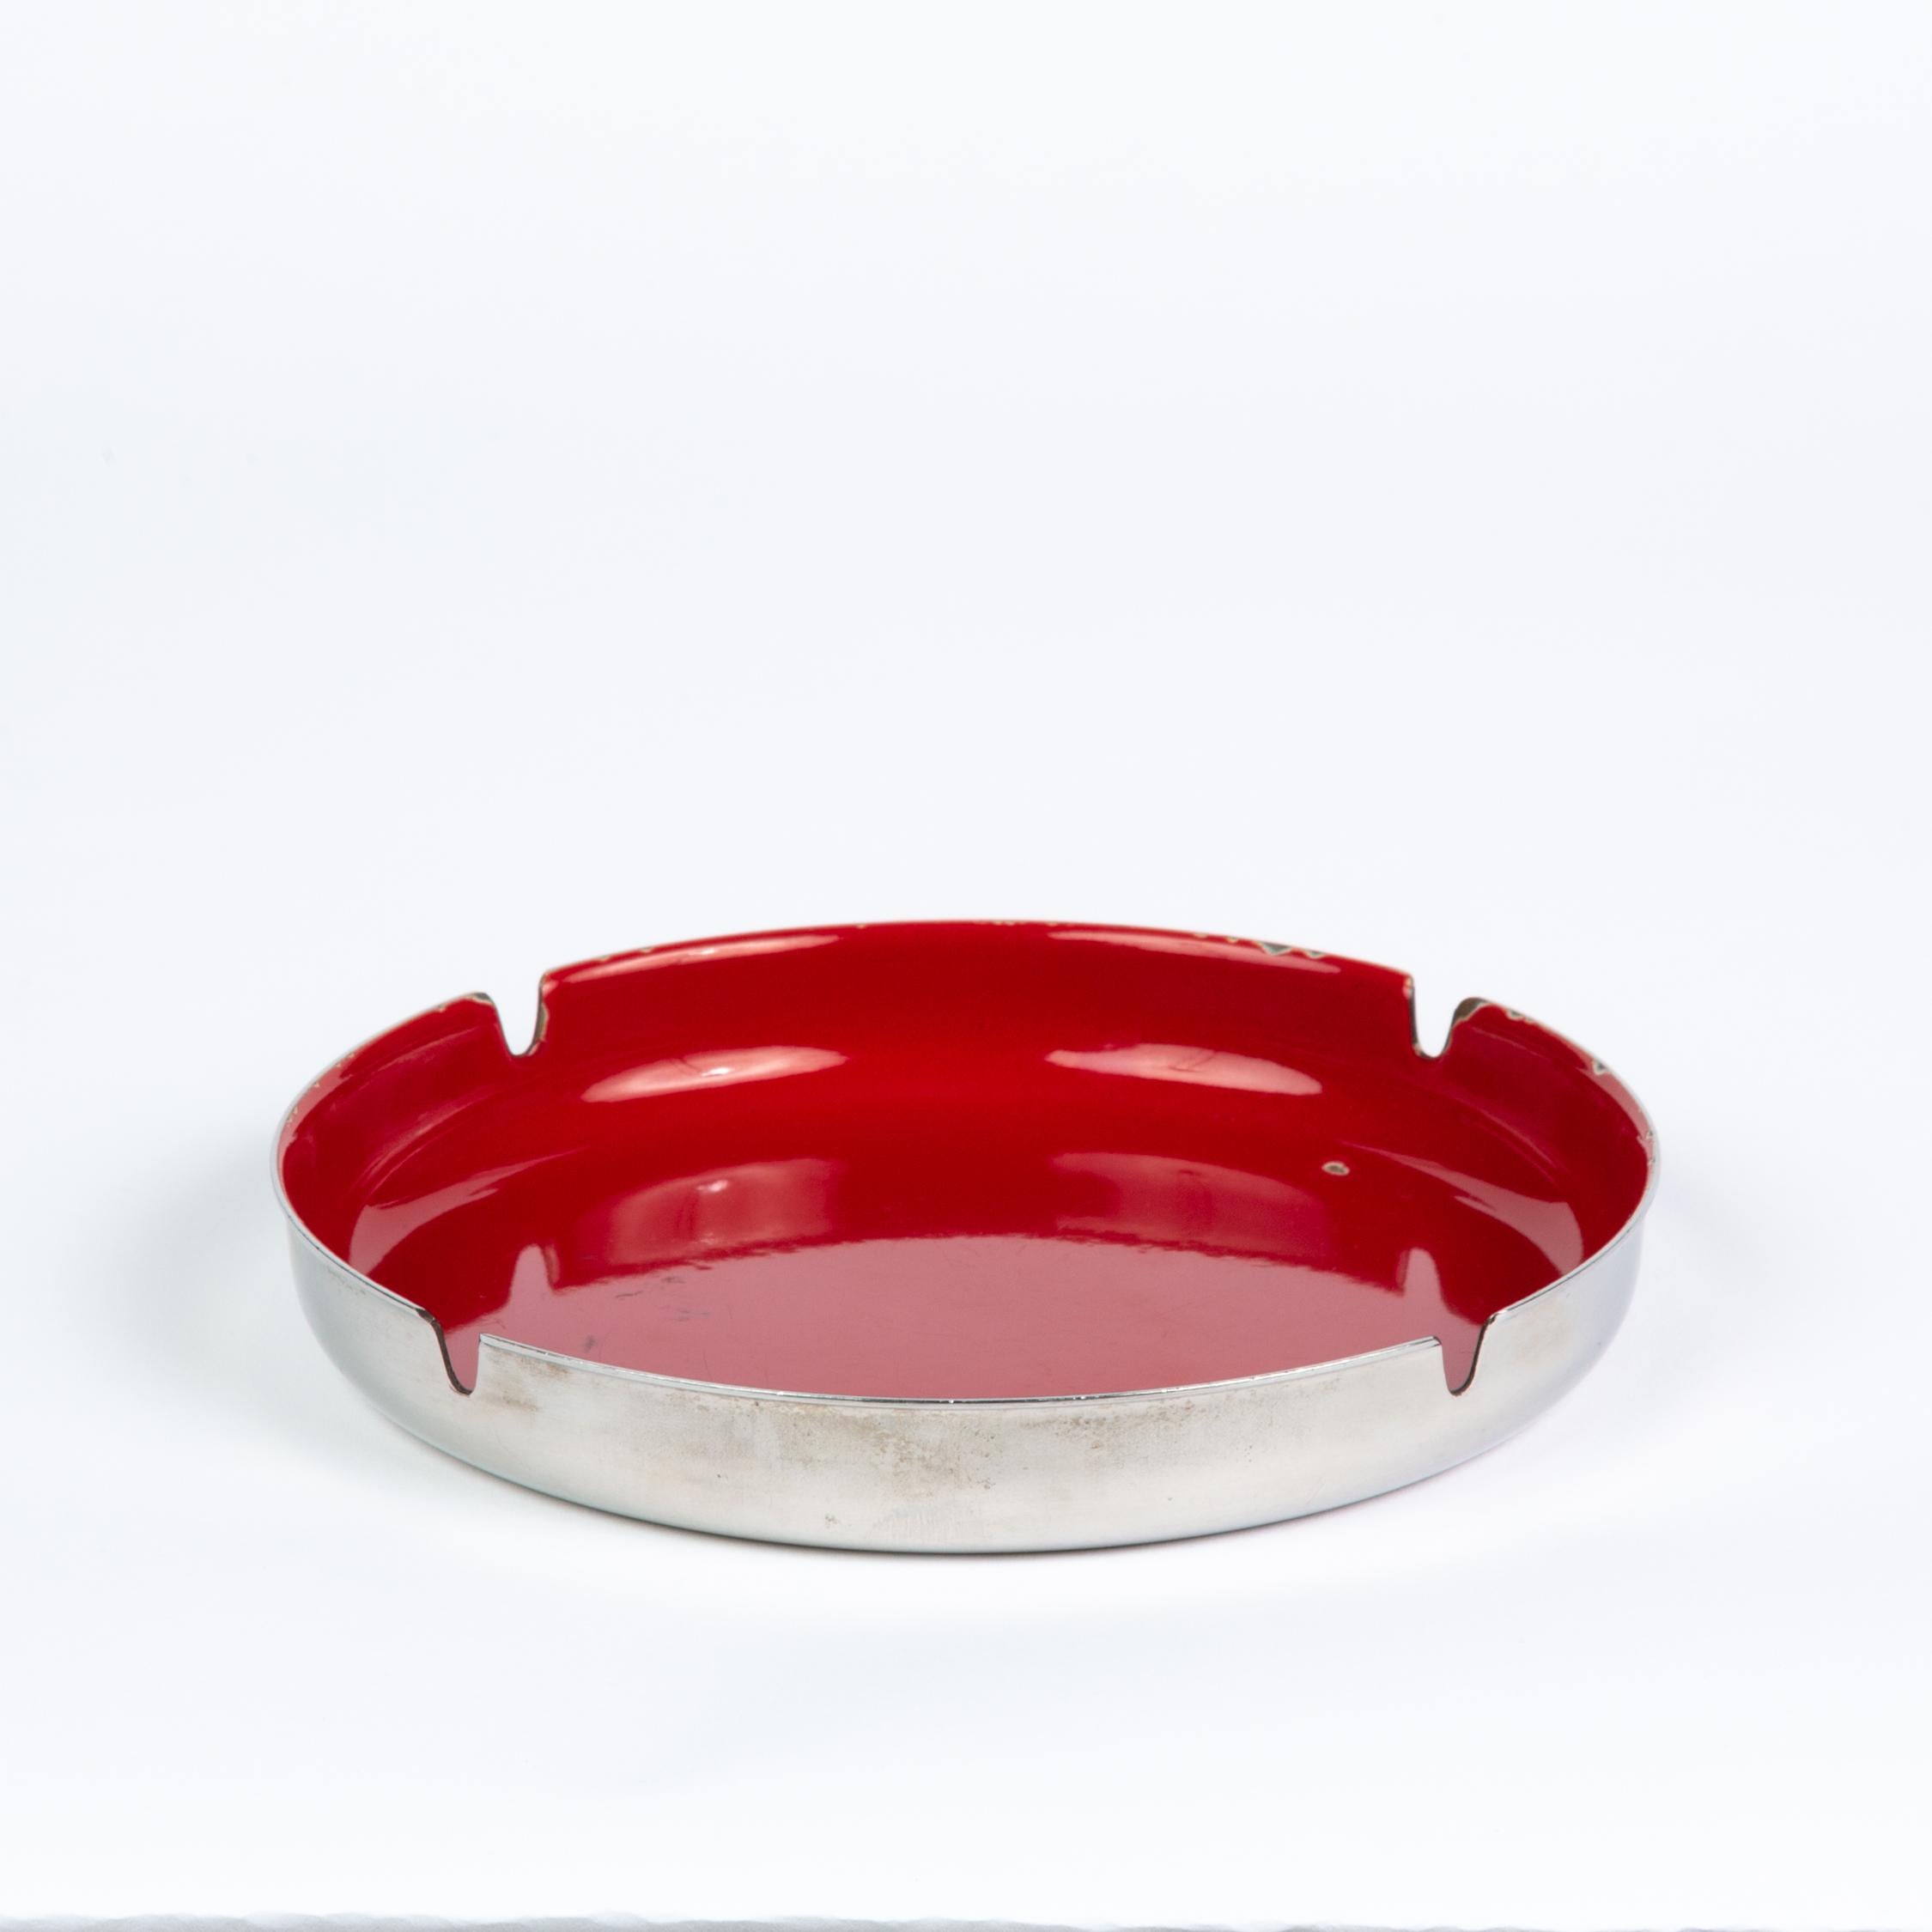 Norwegian Enamelware and Stainless Steel Ashtray by Leif Wessmann